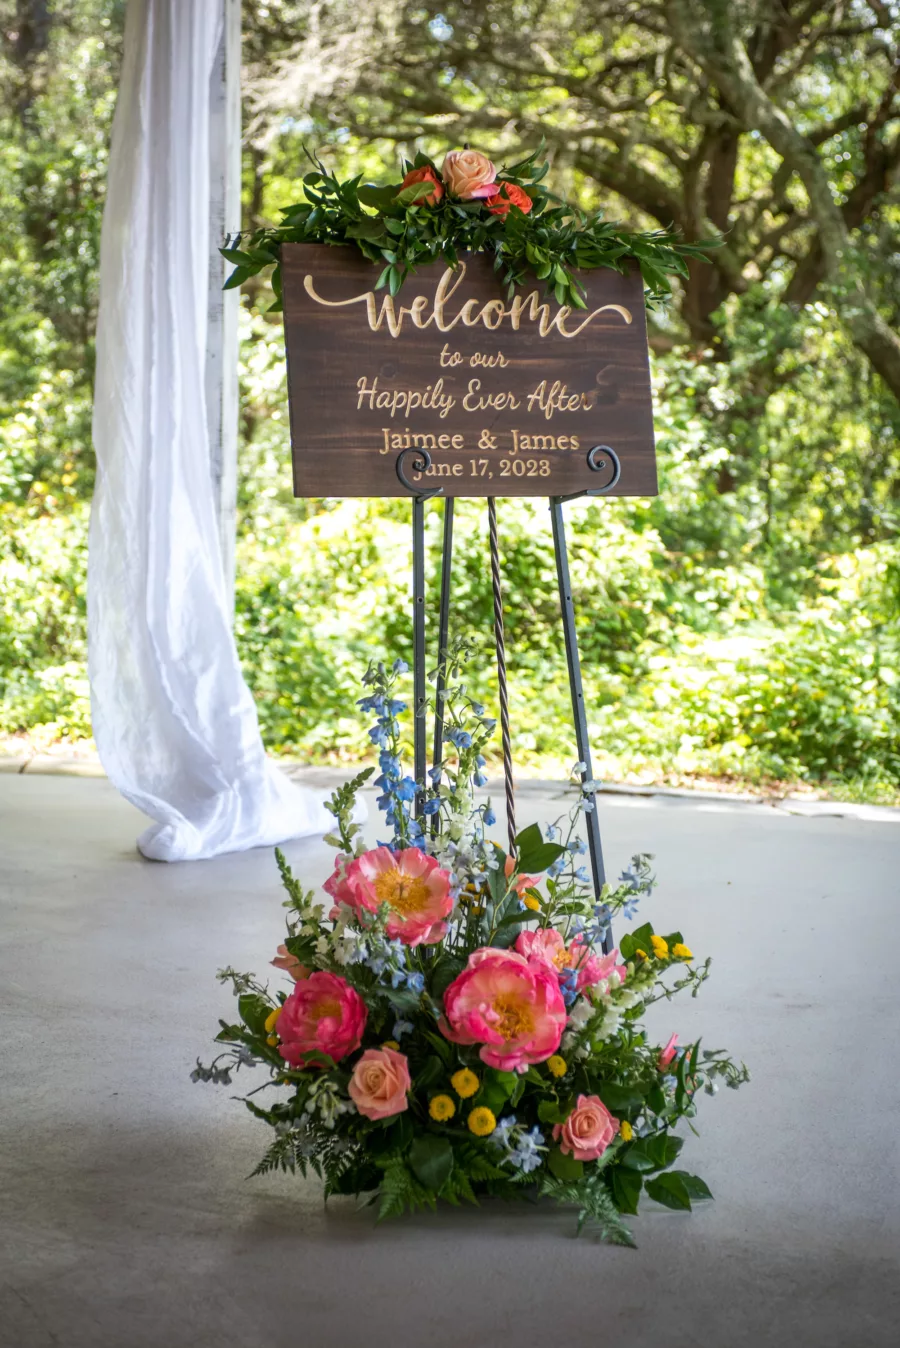 Wooden Welcome Wedding Sign Decor with Vibrant Pink Peony, Blue Stock Flowers, and Greenery Floral Arrangement Ideas